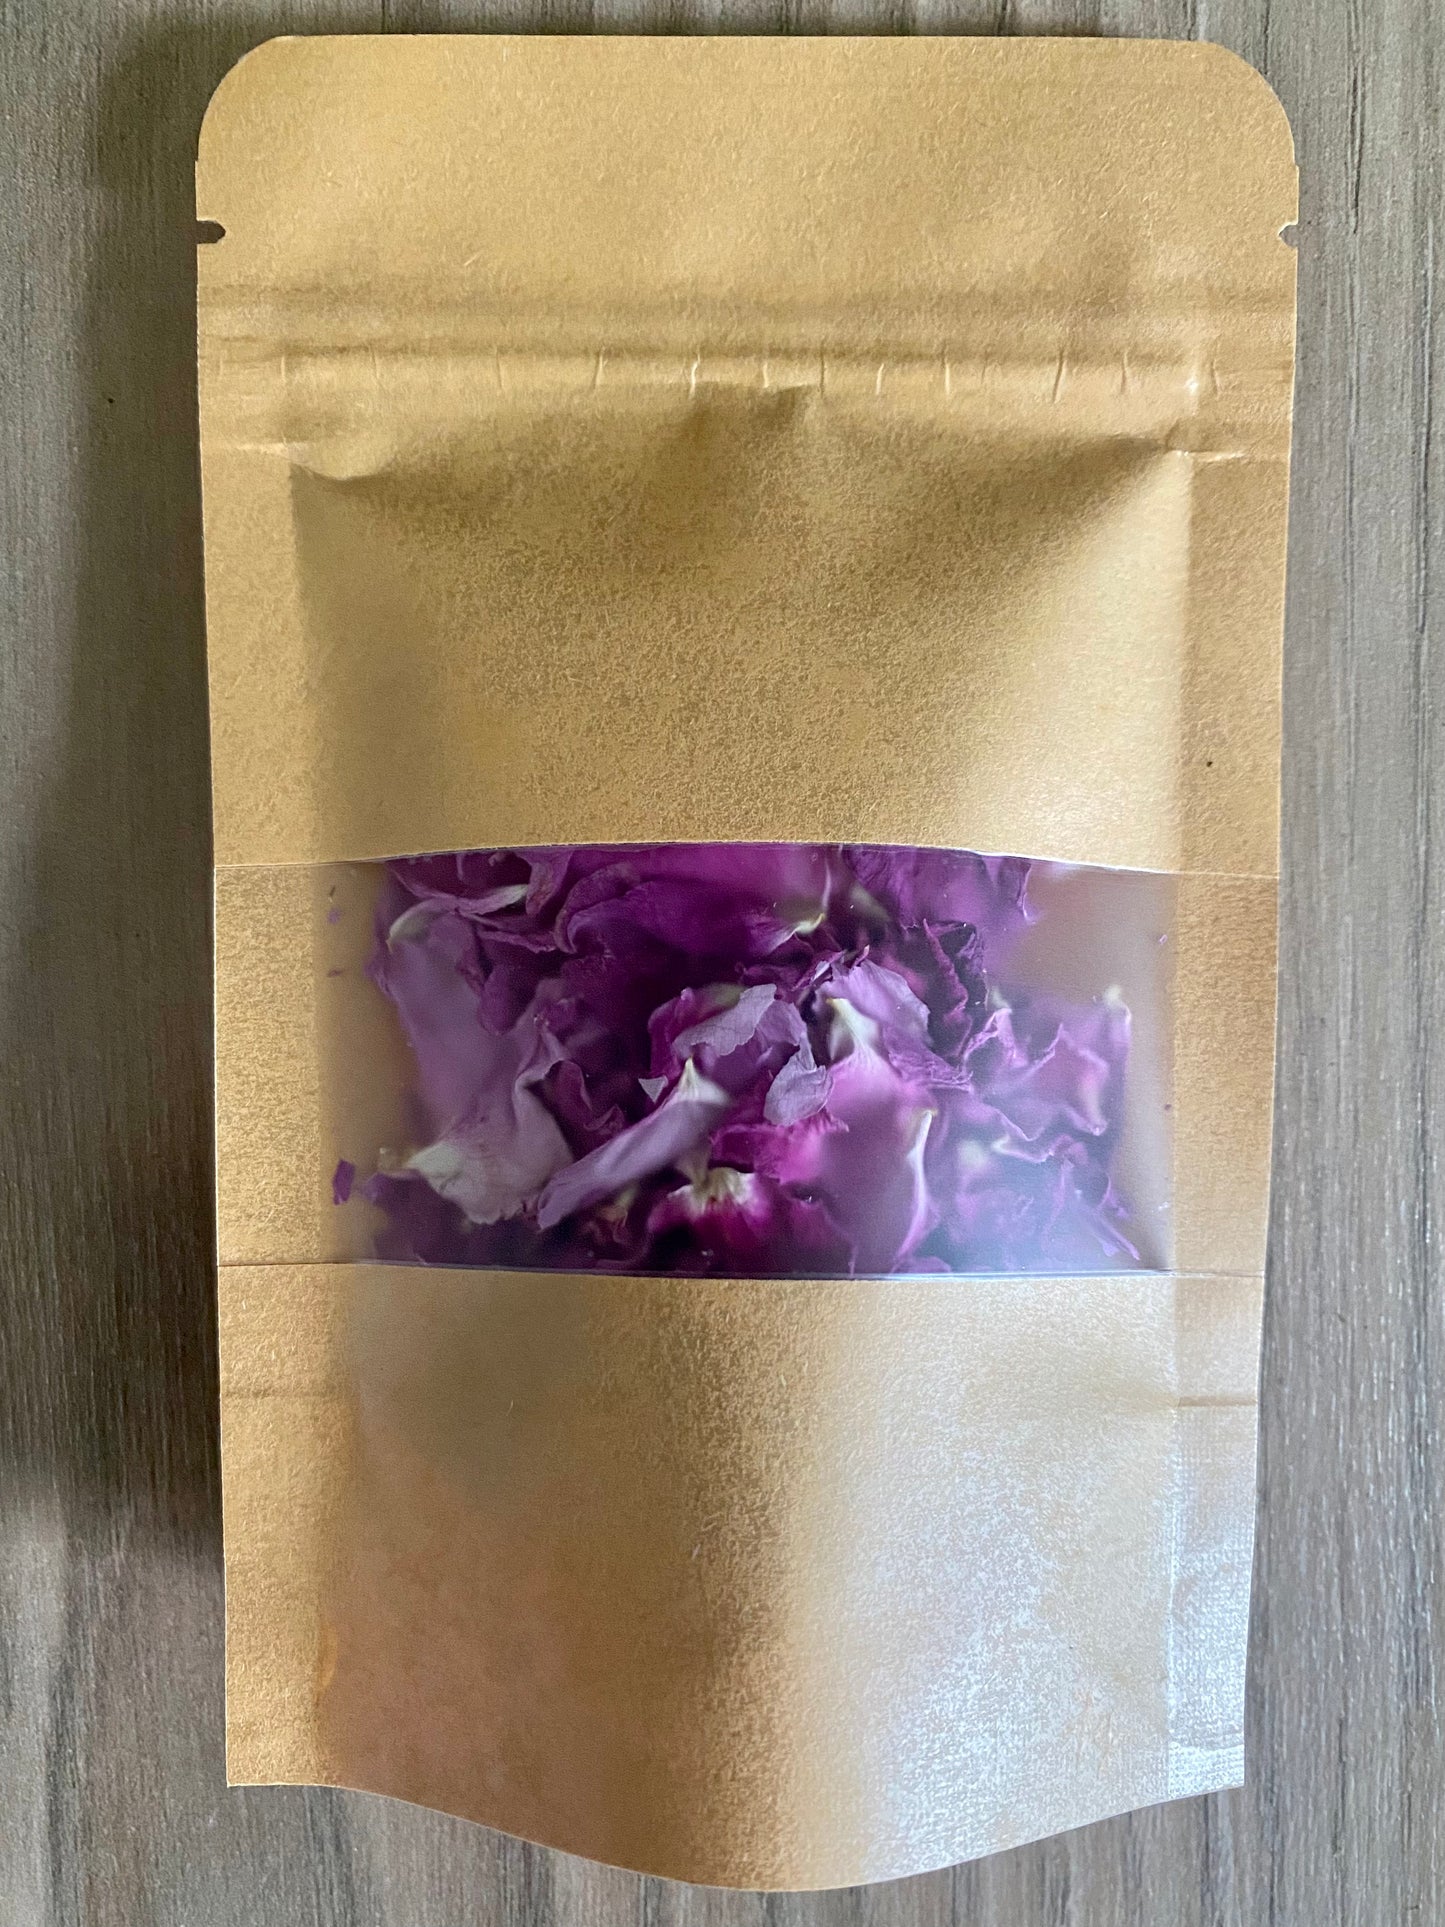 Dehydrated rose flowers 100% natural - Product of Quebec